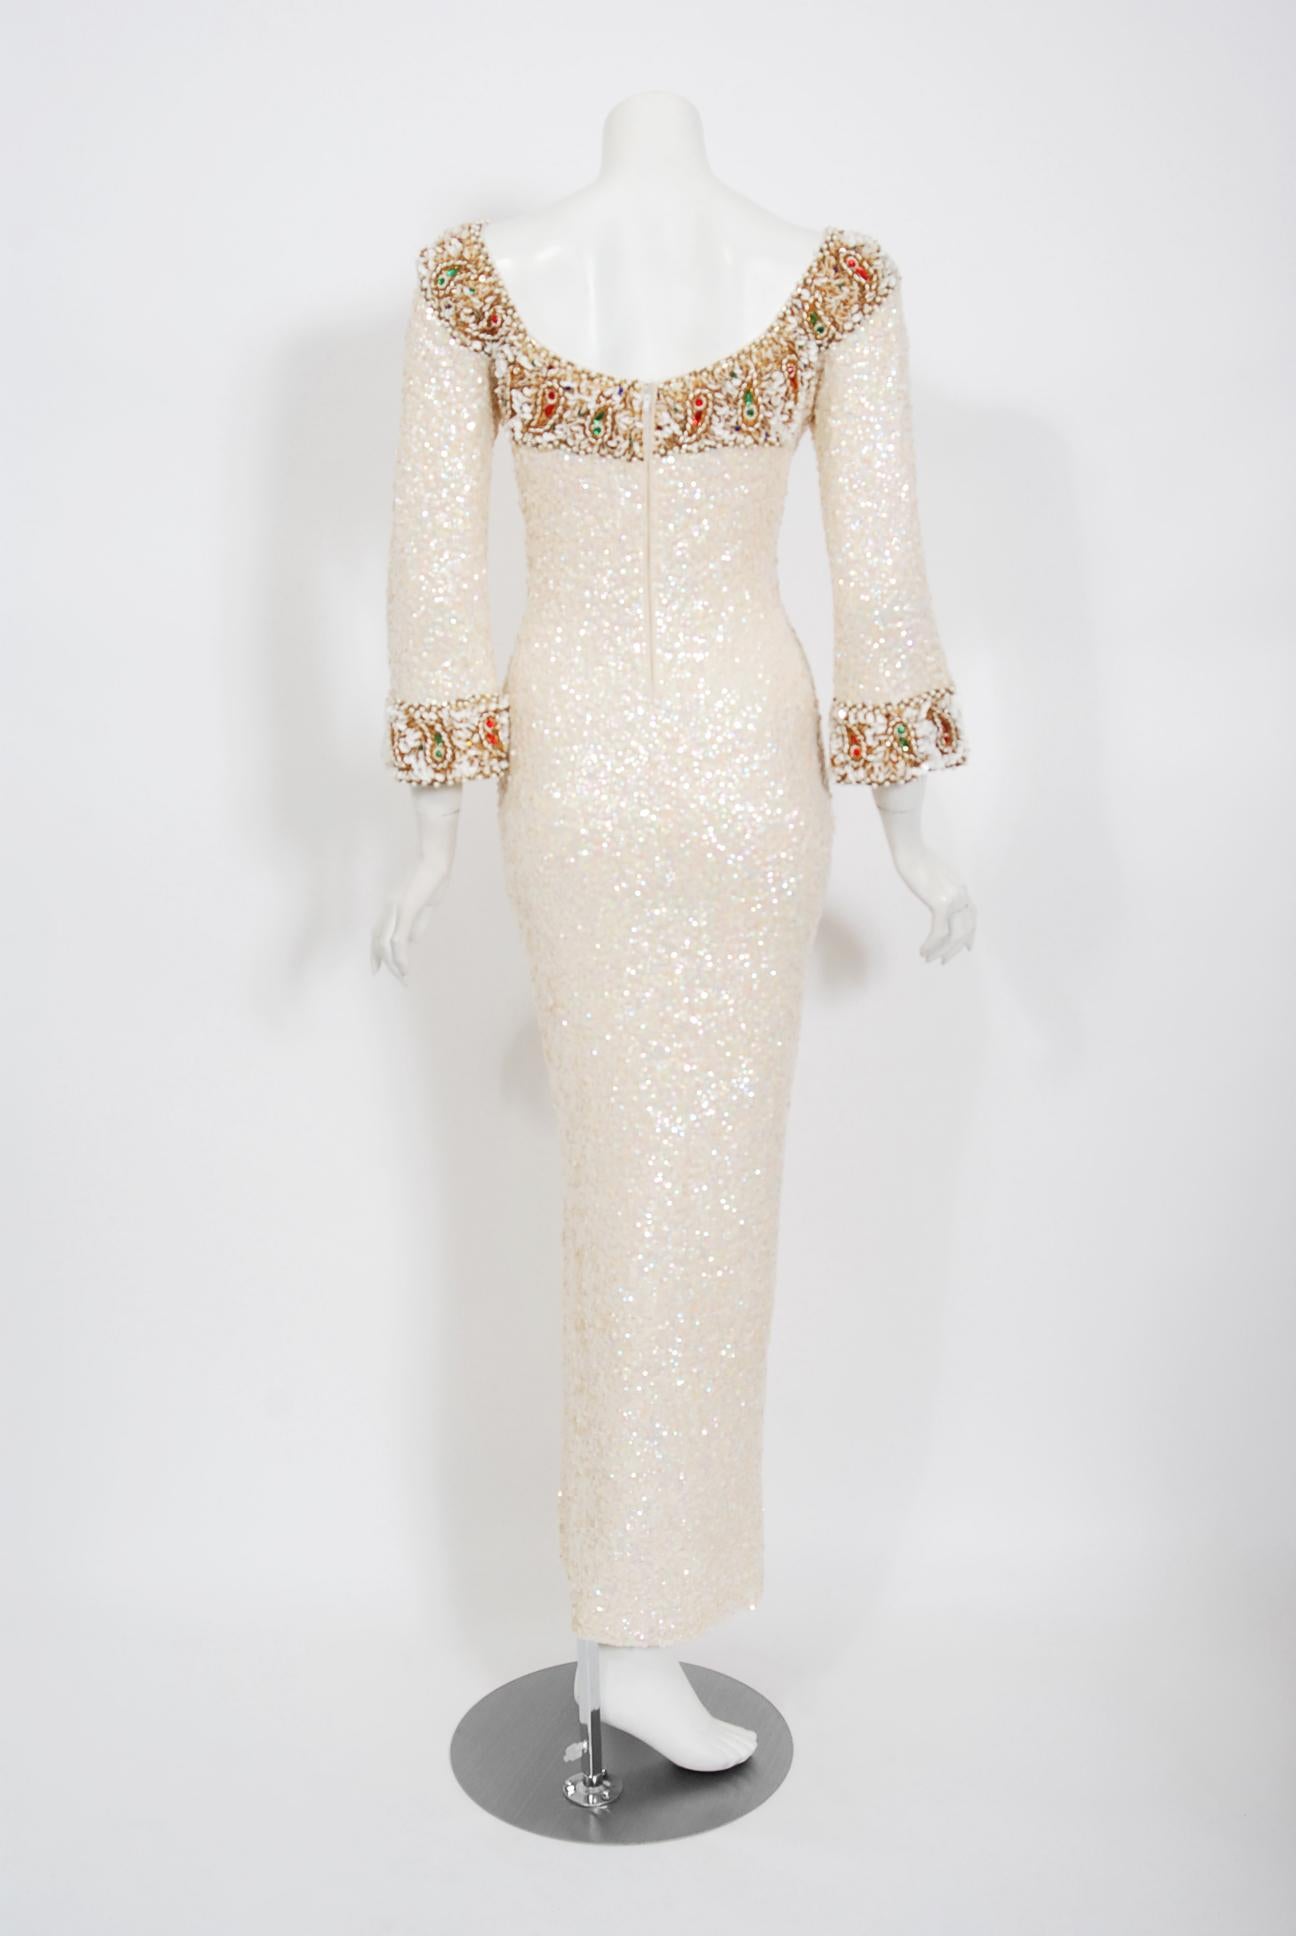 Women's 1960's Gene Shelly Ivory Creme Beaded Sequin Wool Knit Scoopneck Hourglass Gown